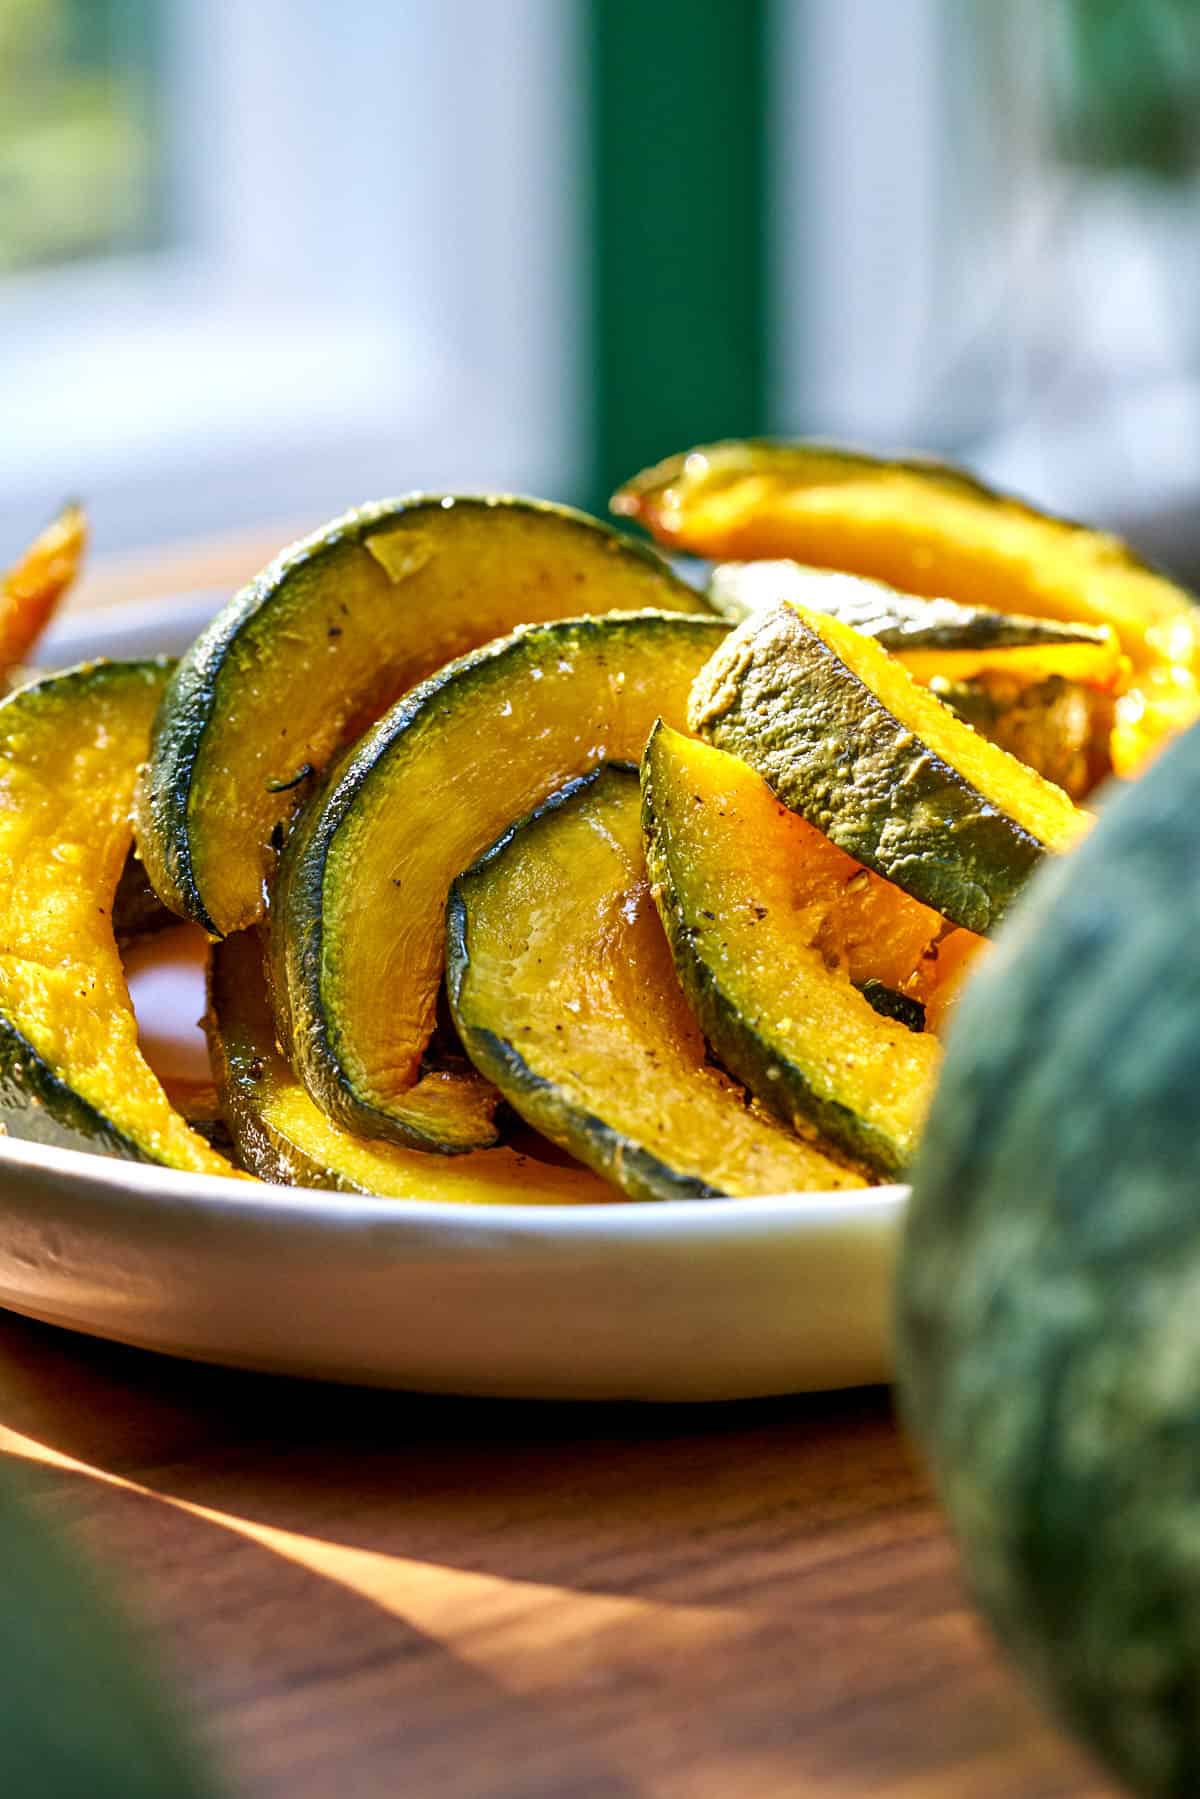 Roasted kabocha squash on a white plate on a wood table.